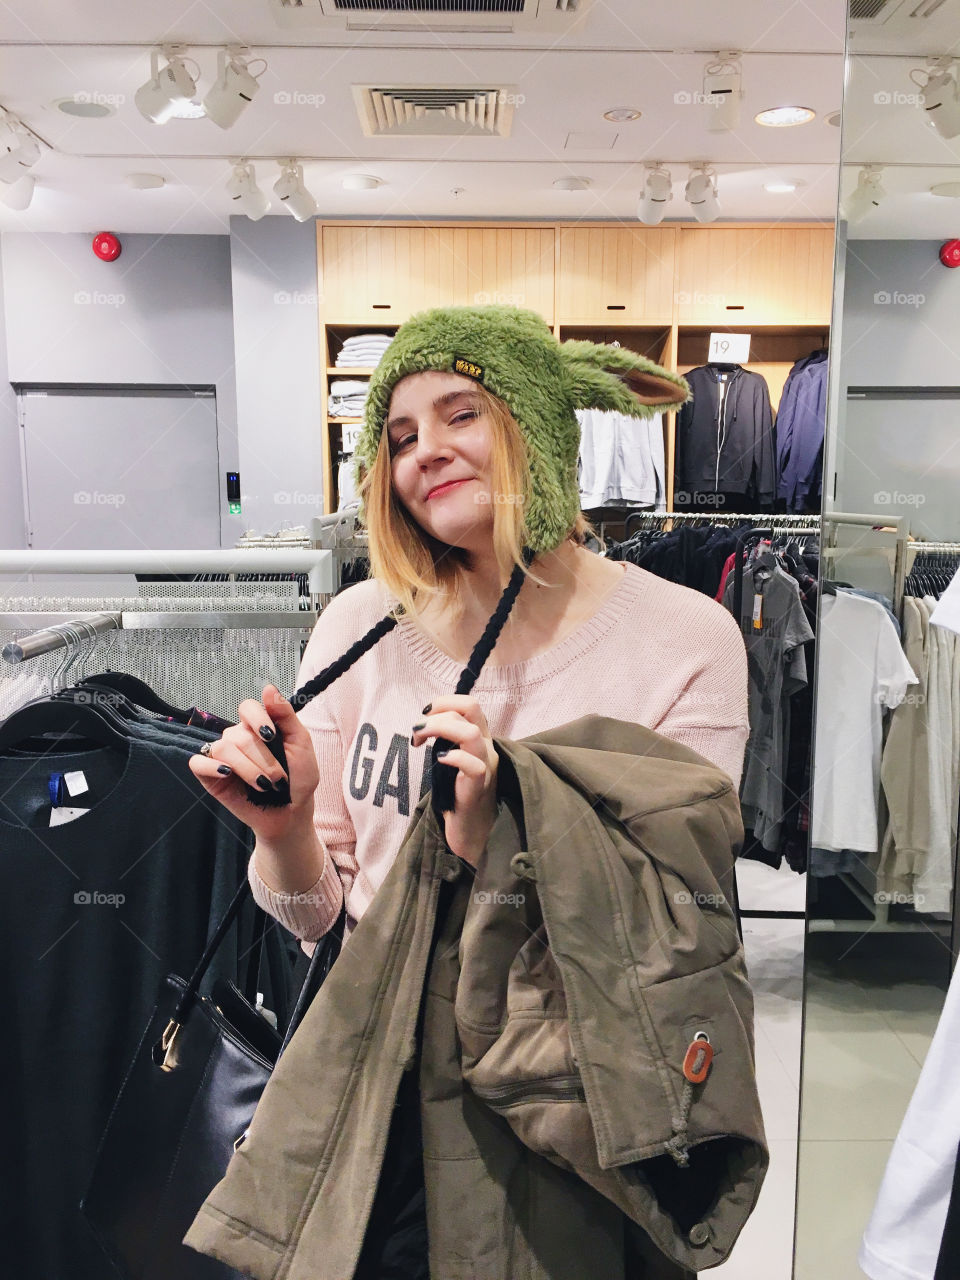 So we were shopping for clothes and she decided to try on some funny fancy hats.